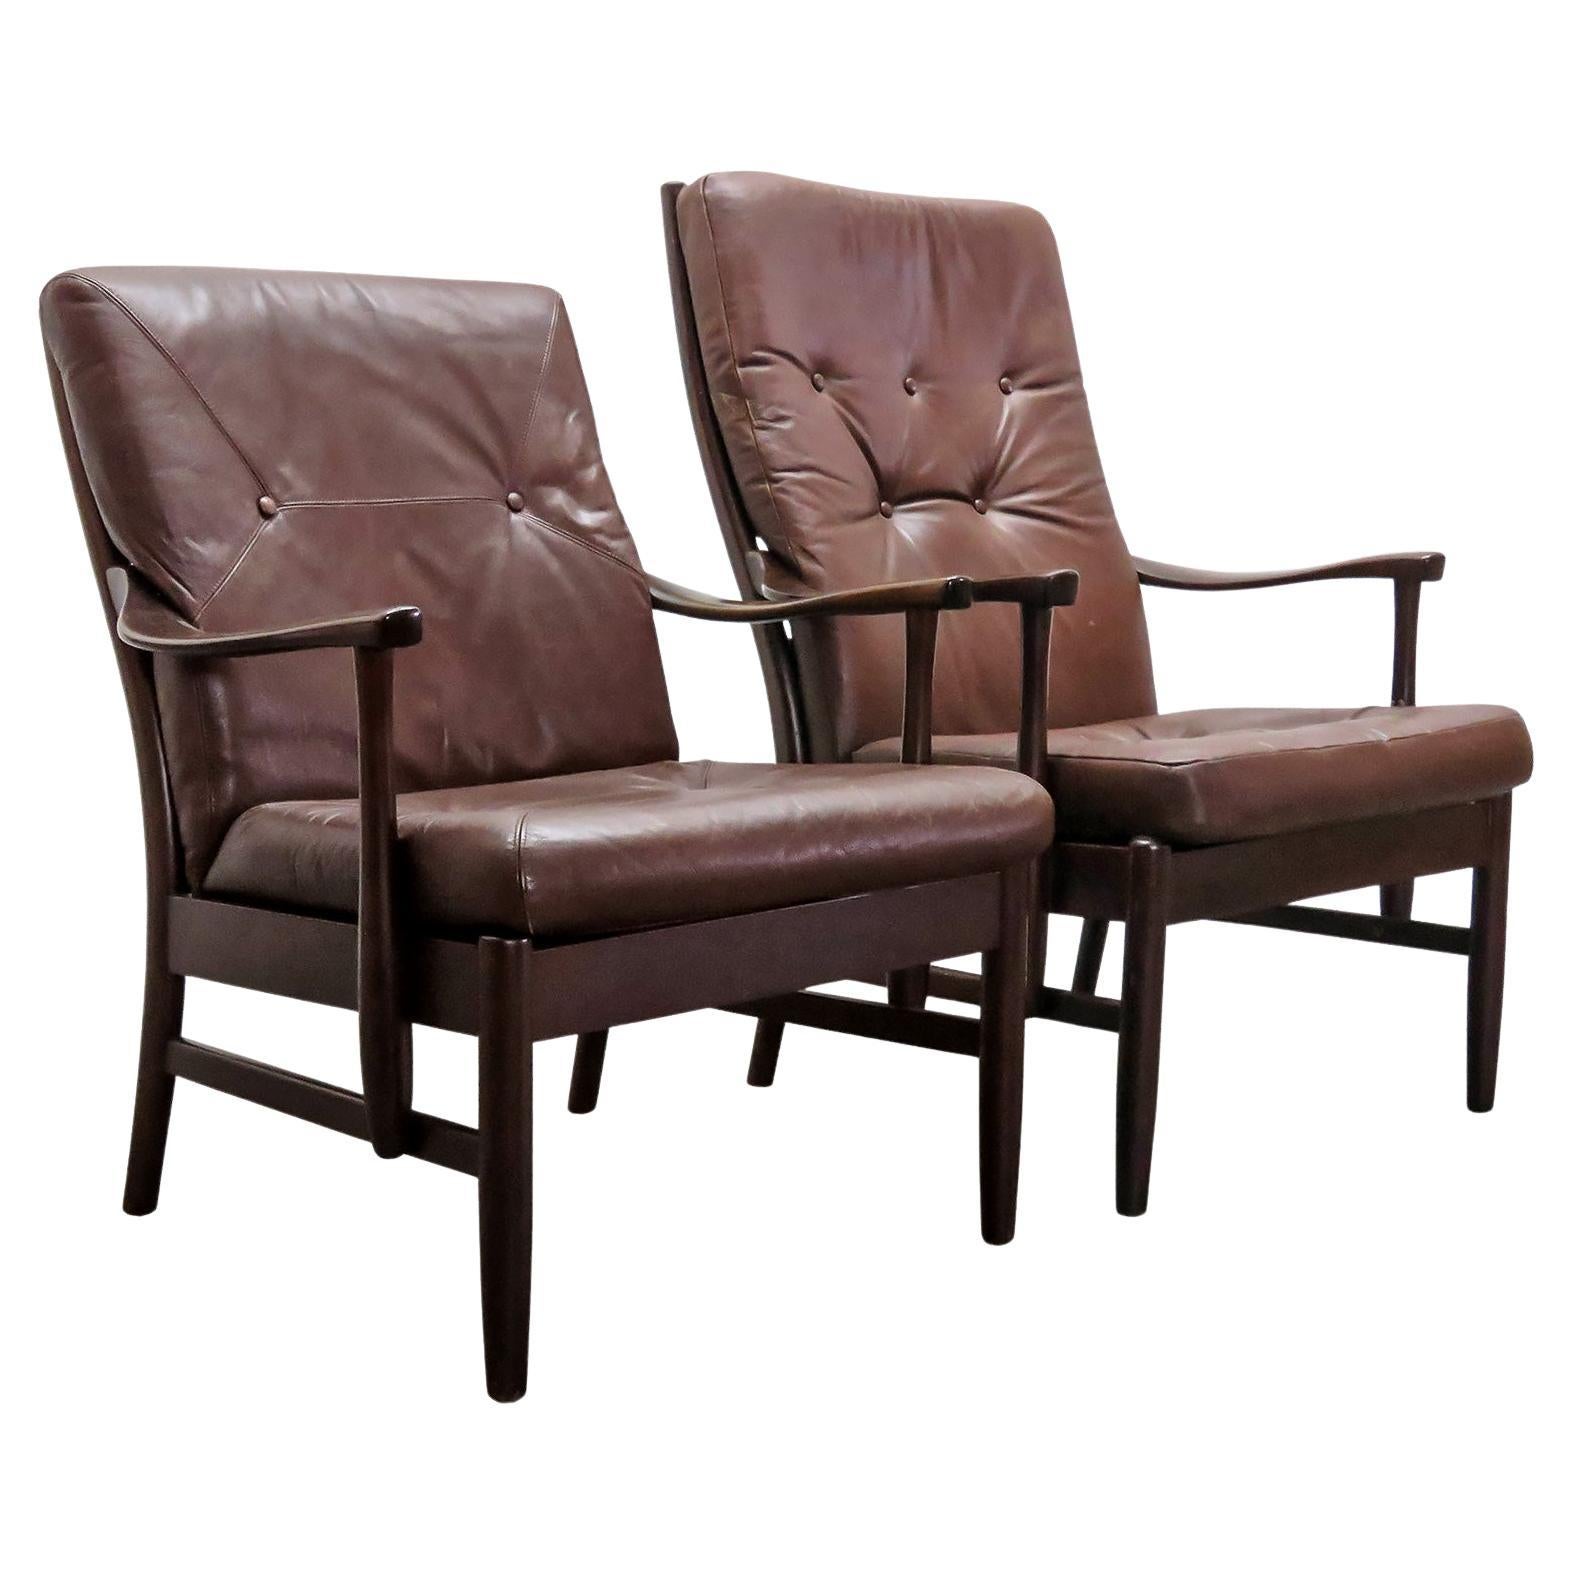 Set of Two Danish Leather Side Chairs, 1950 For Sale